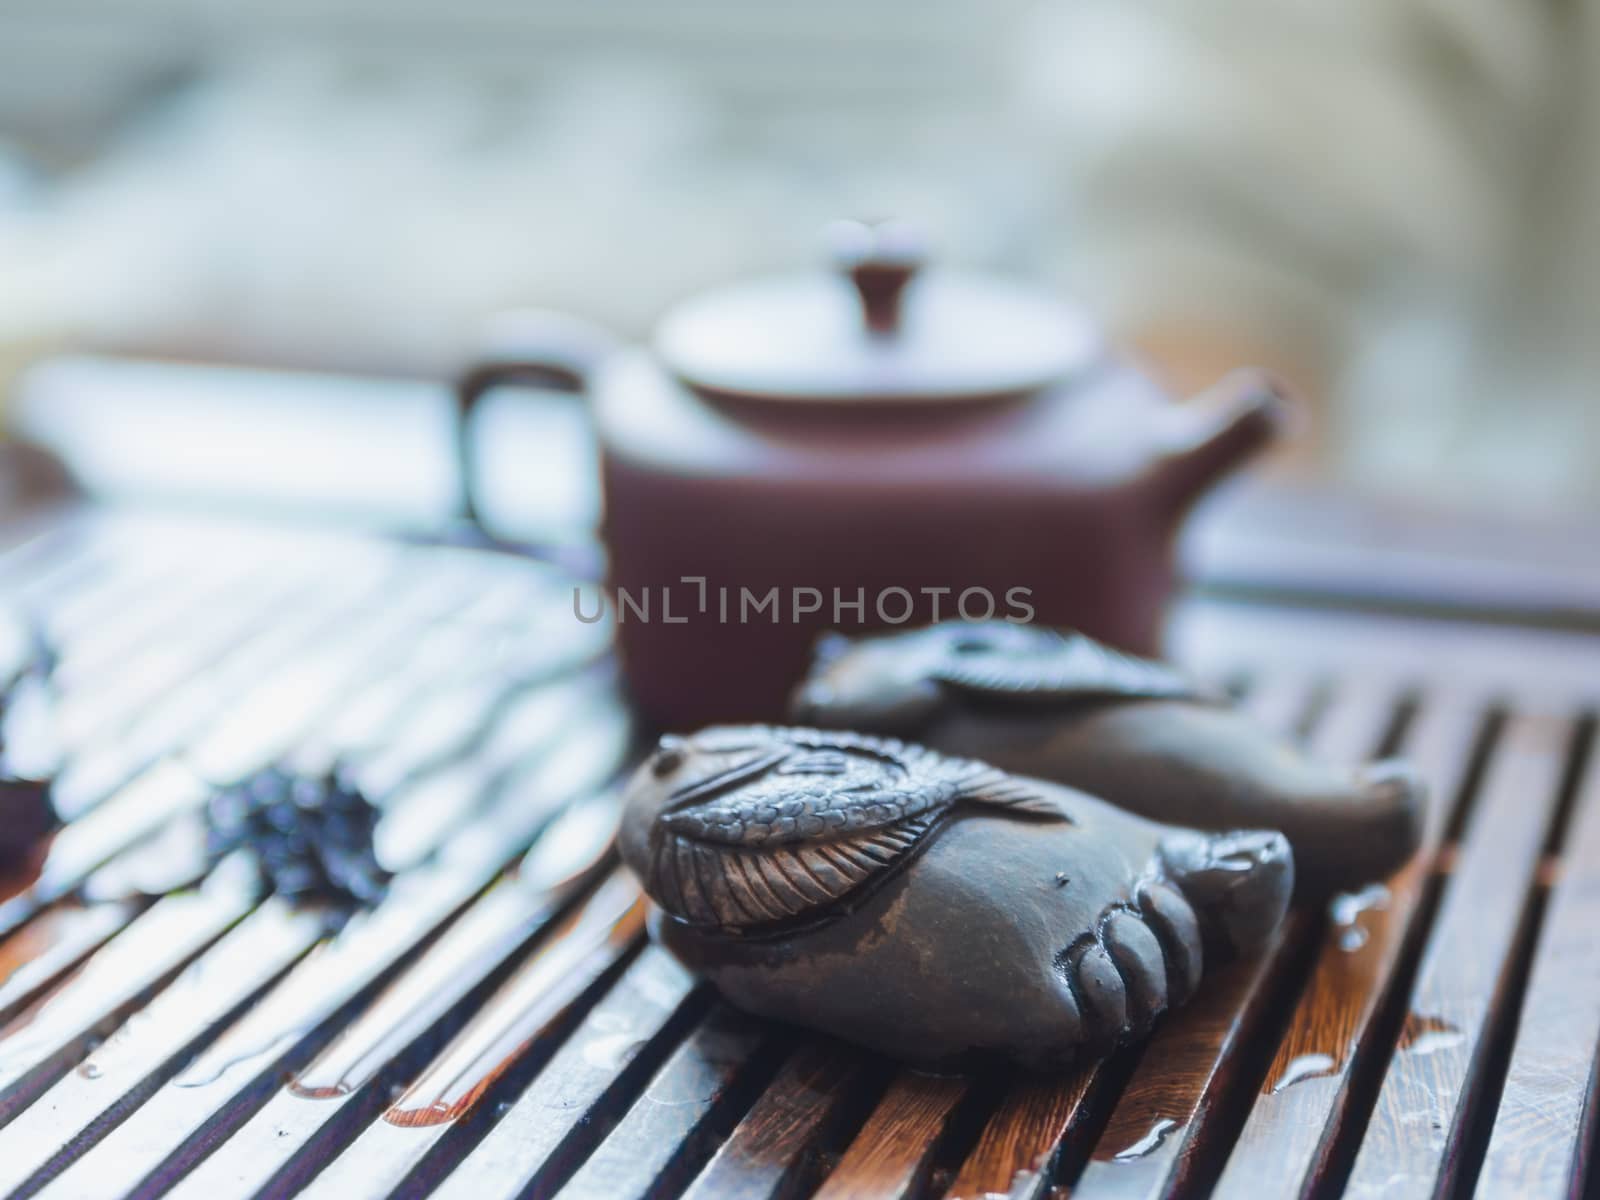 Chinese tea ceremony. Close up view of buddha foot figure and clay teapot on wooden tabletop. Pu erh tea ceremony.